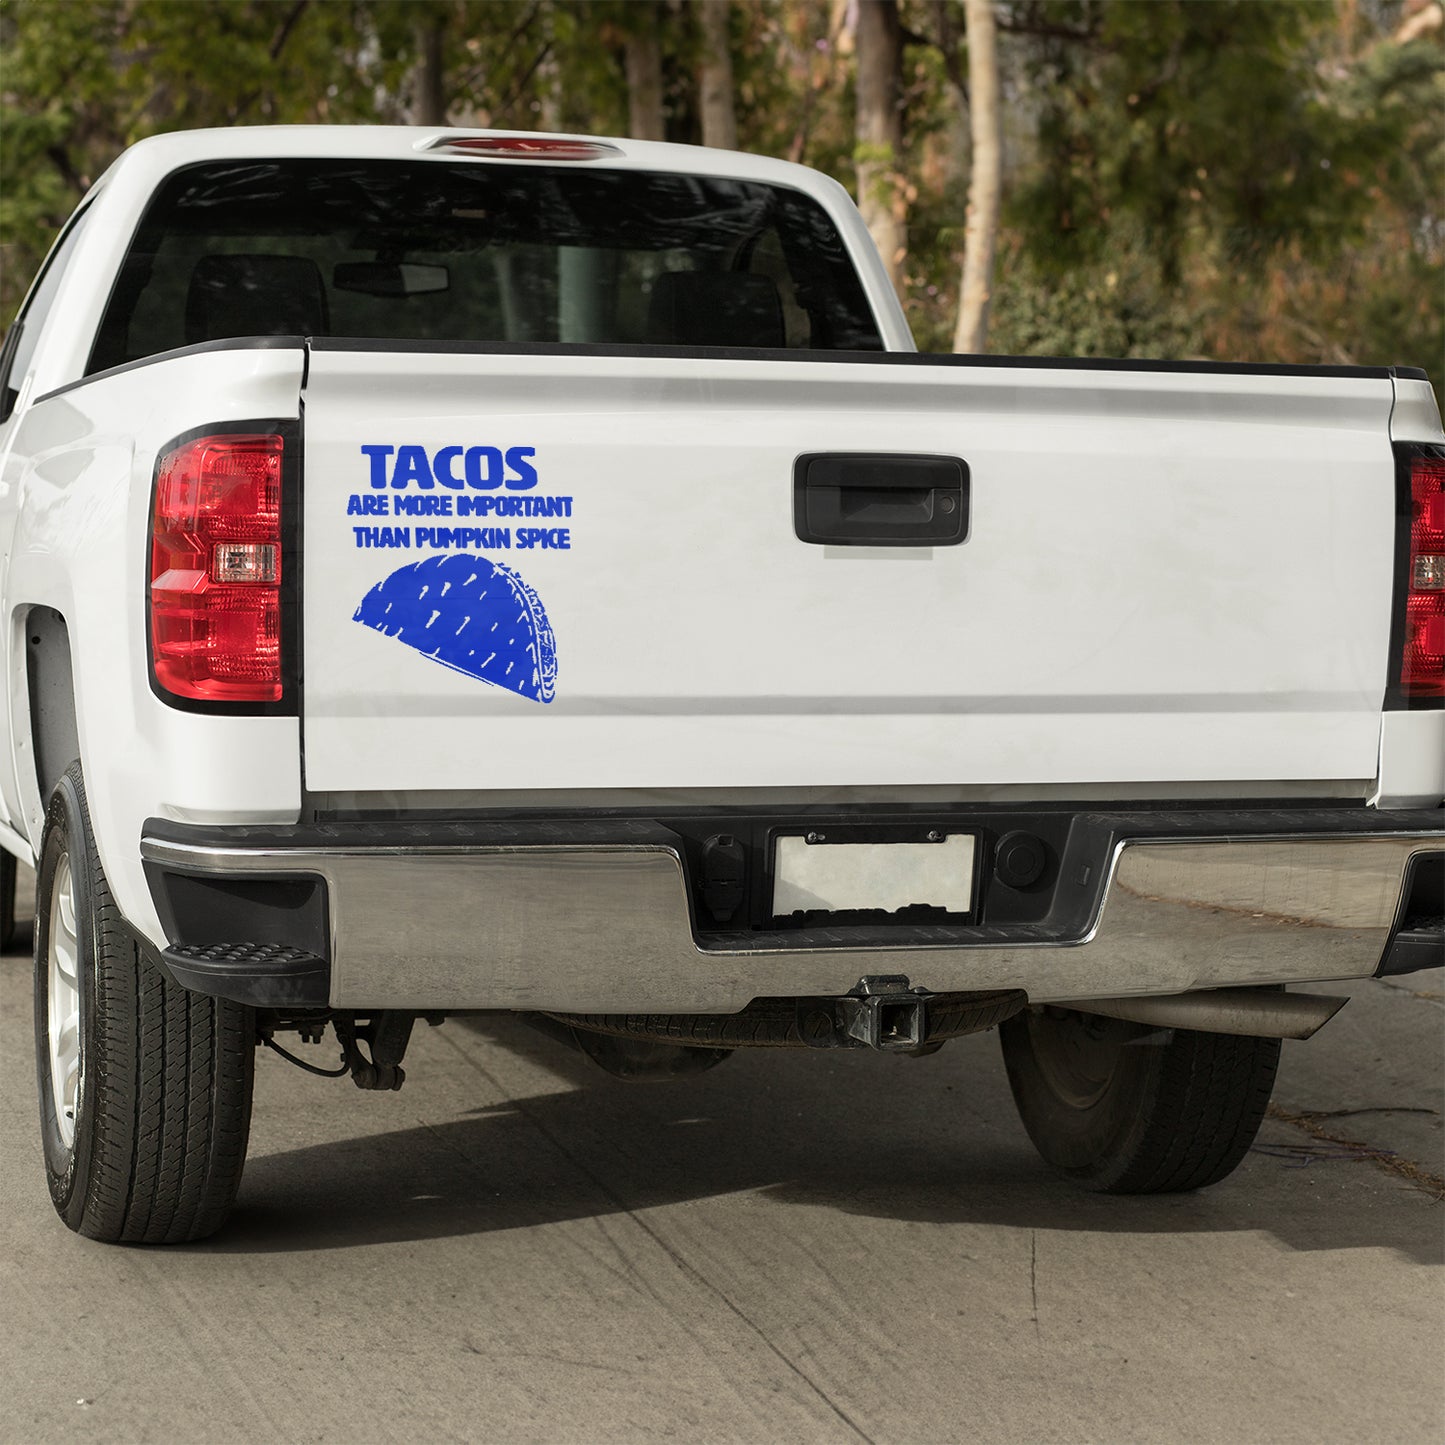 Tacos are more important than pumpkin spice Vinyl decal decal stickers Decals for cars Decals for Trucks decals for tumblers Epstein Epstein Client List minivan minivan sticker SUV decals Taco truck decals window decal car Window decals window decor